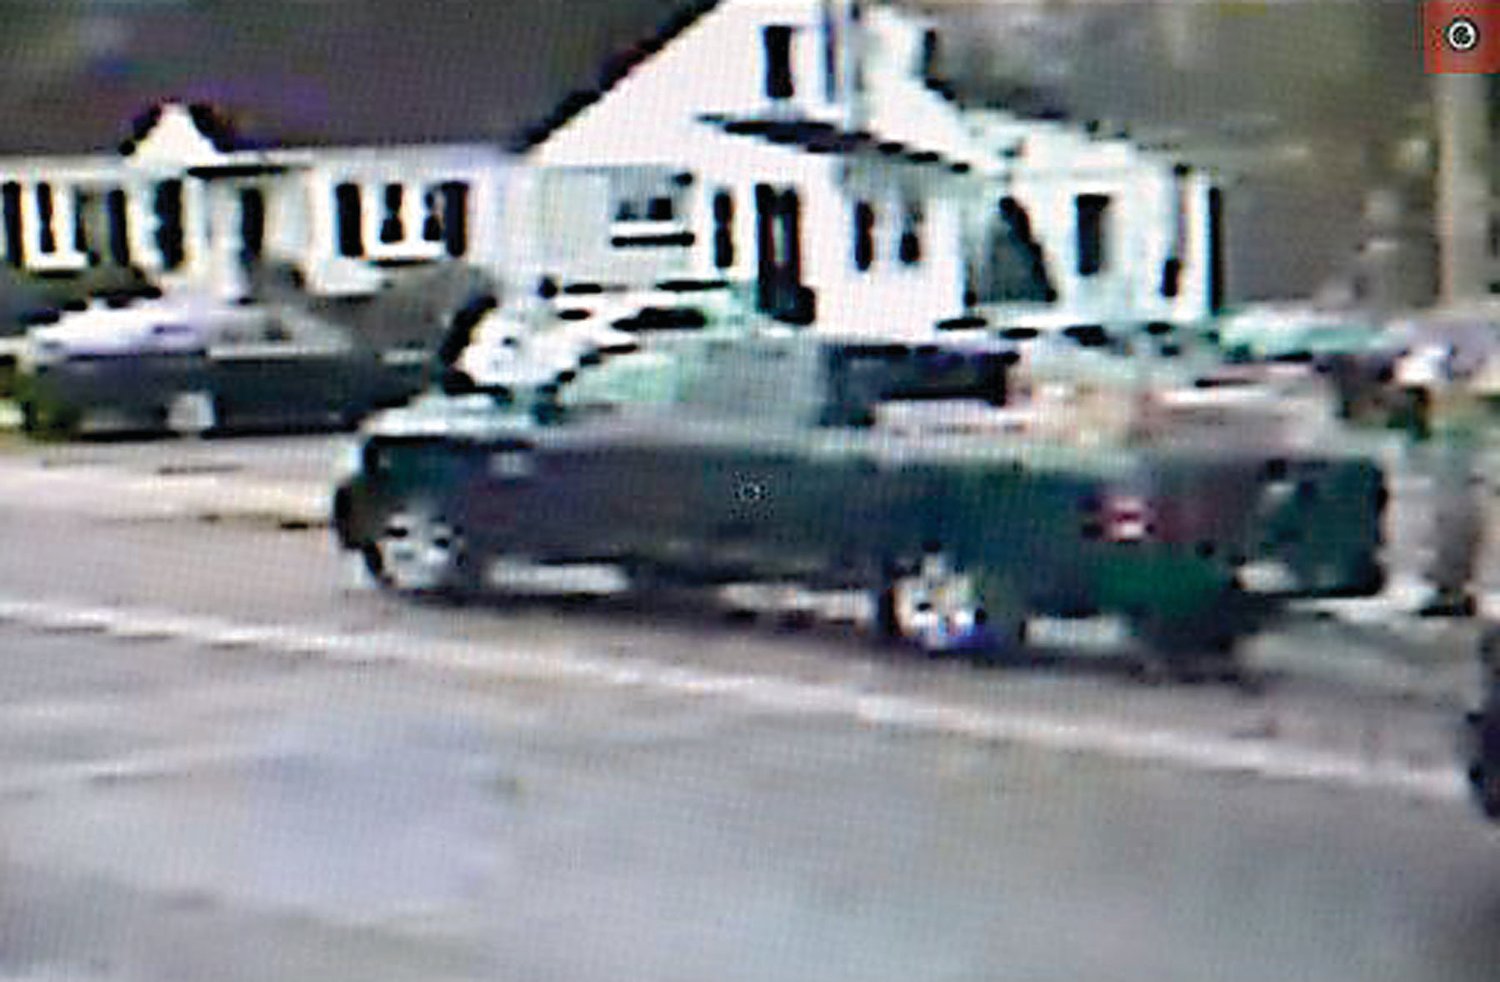 The vehicle in this photograph was seen driving to a construction site for new townhomes in the 100 block of East Walnut Street, Perkasie, and two people were seen entering several townhomes under construction and removing several boxes, containing new air conditioner condensing units, a coil and a furnace.